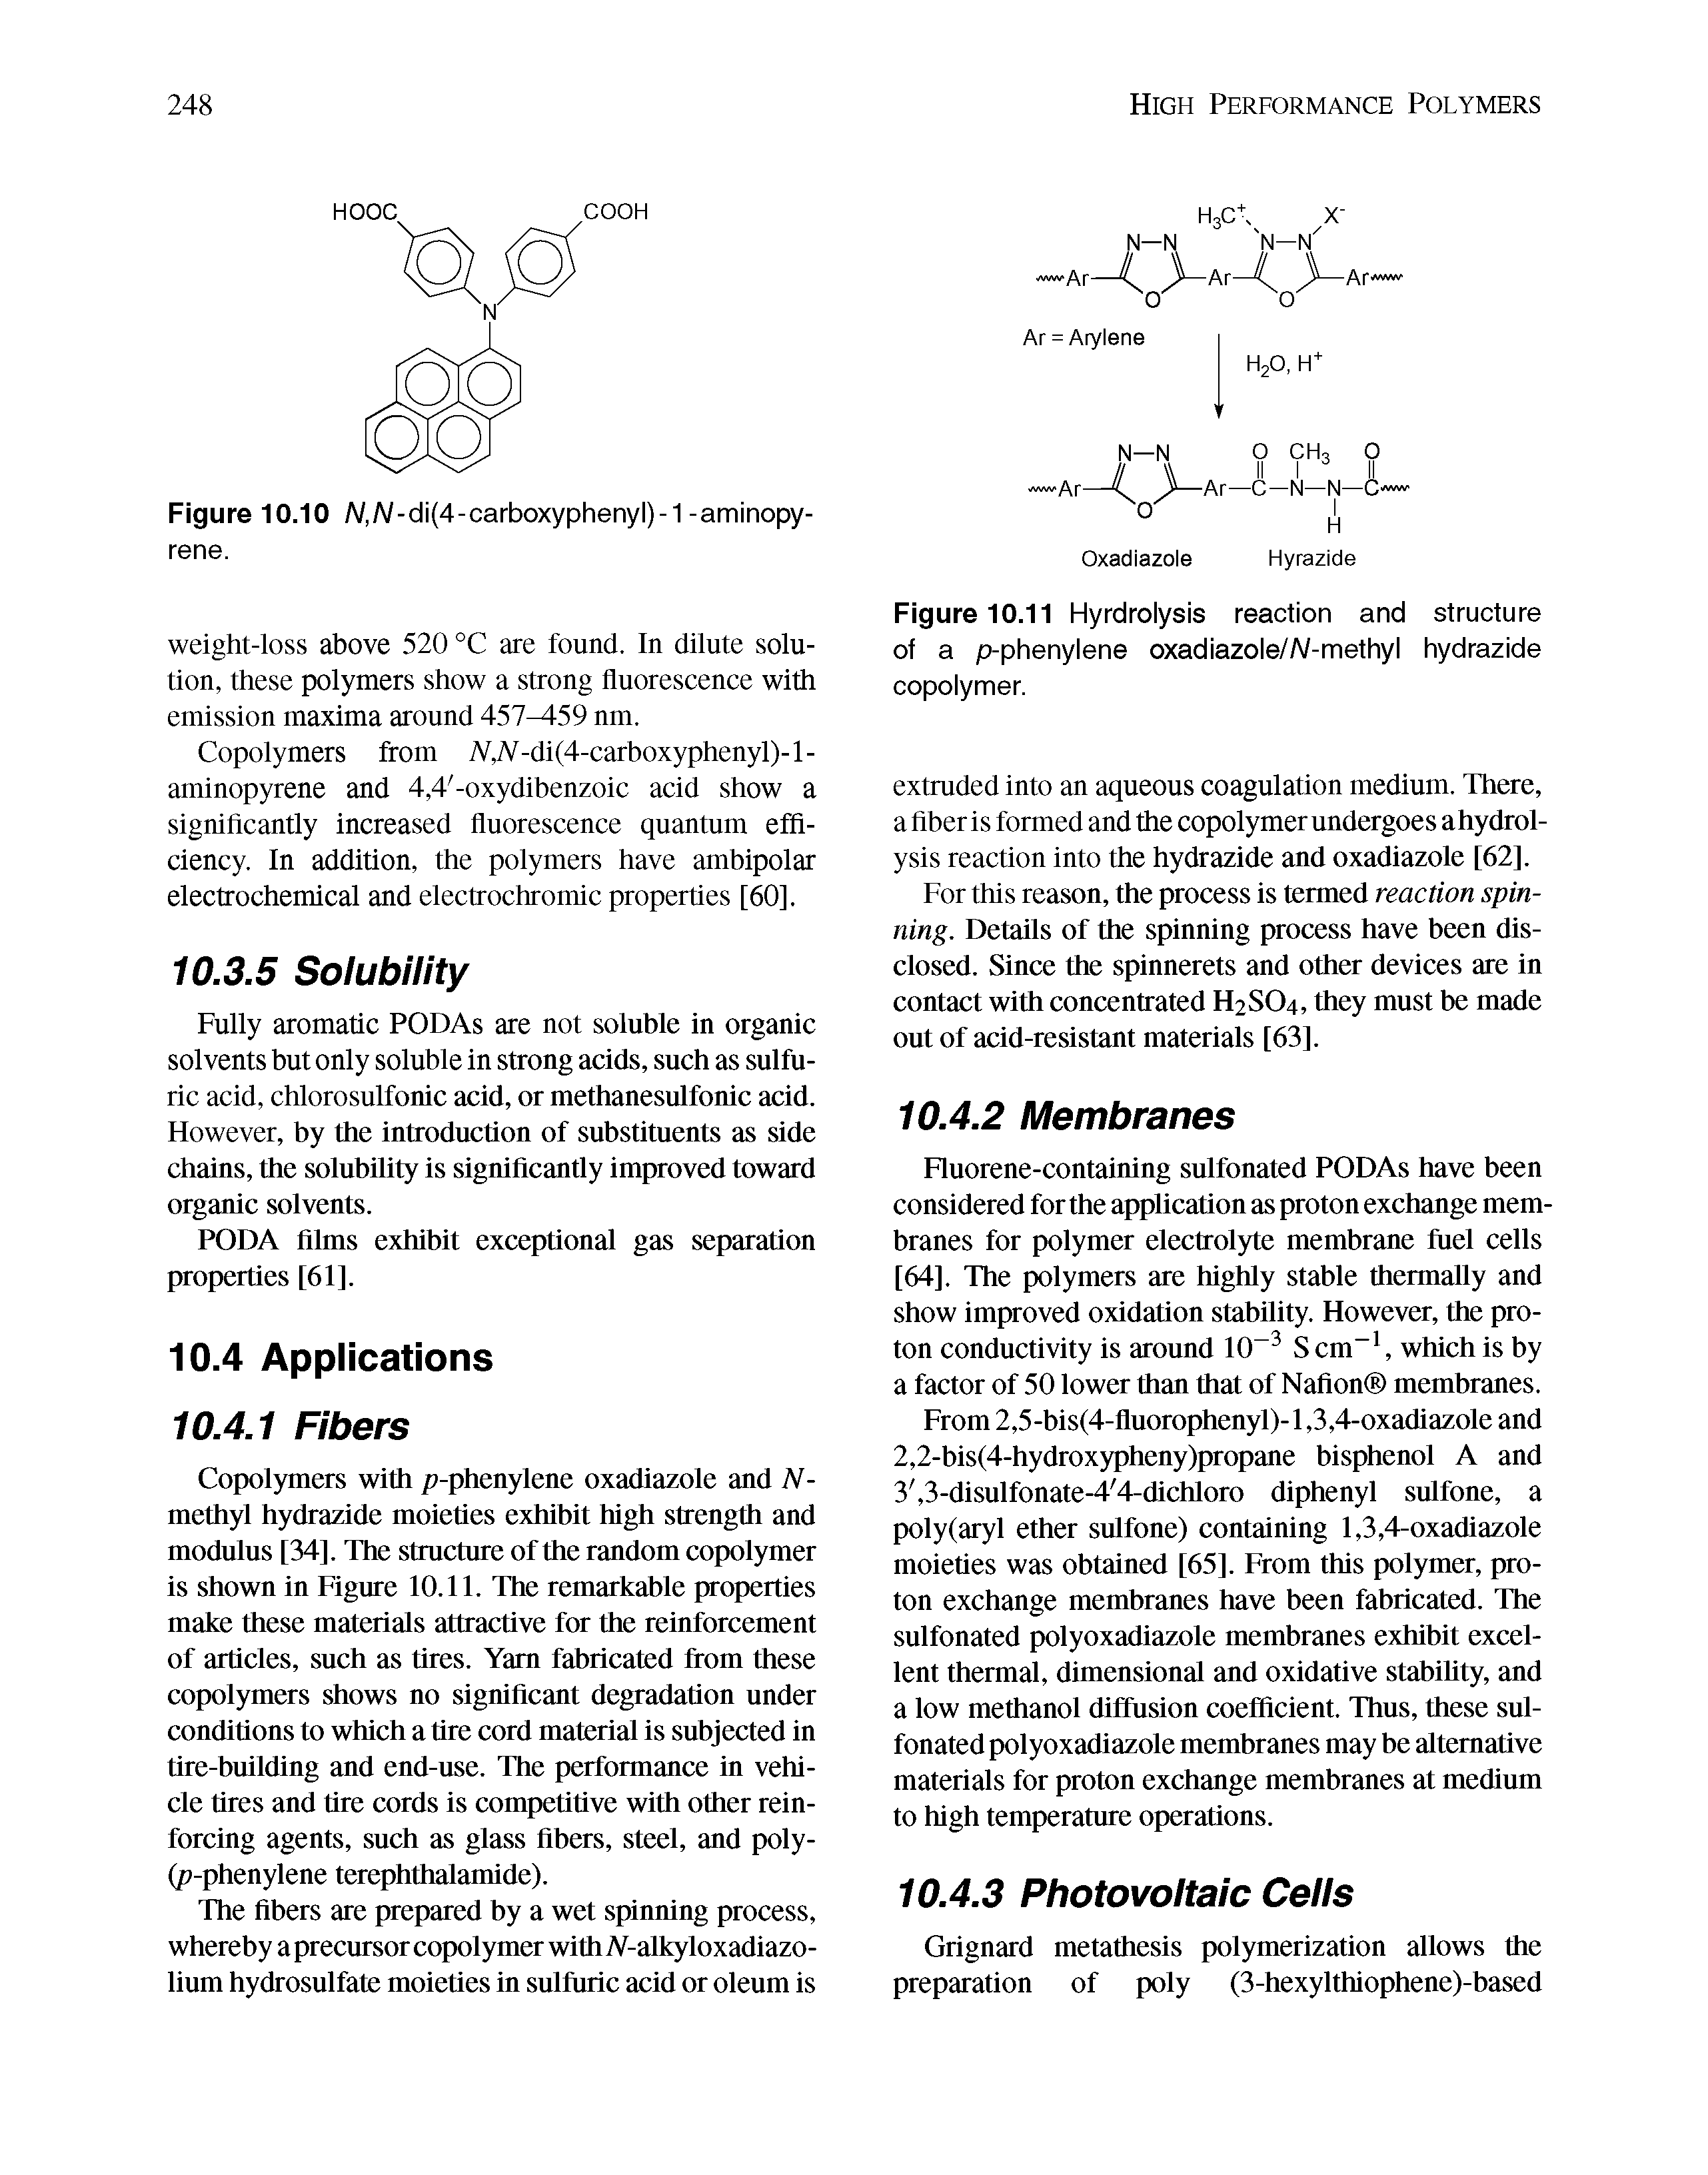 Figure 10.11 Hyrdrolysis reaction and structure of a p-phenylene oxadiazole/A/-methyl hydrazide copolymer.